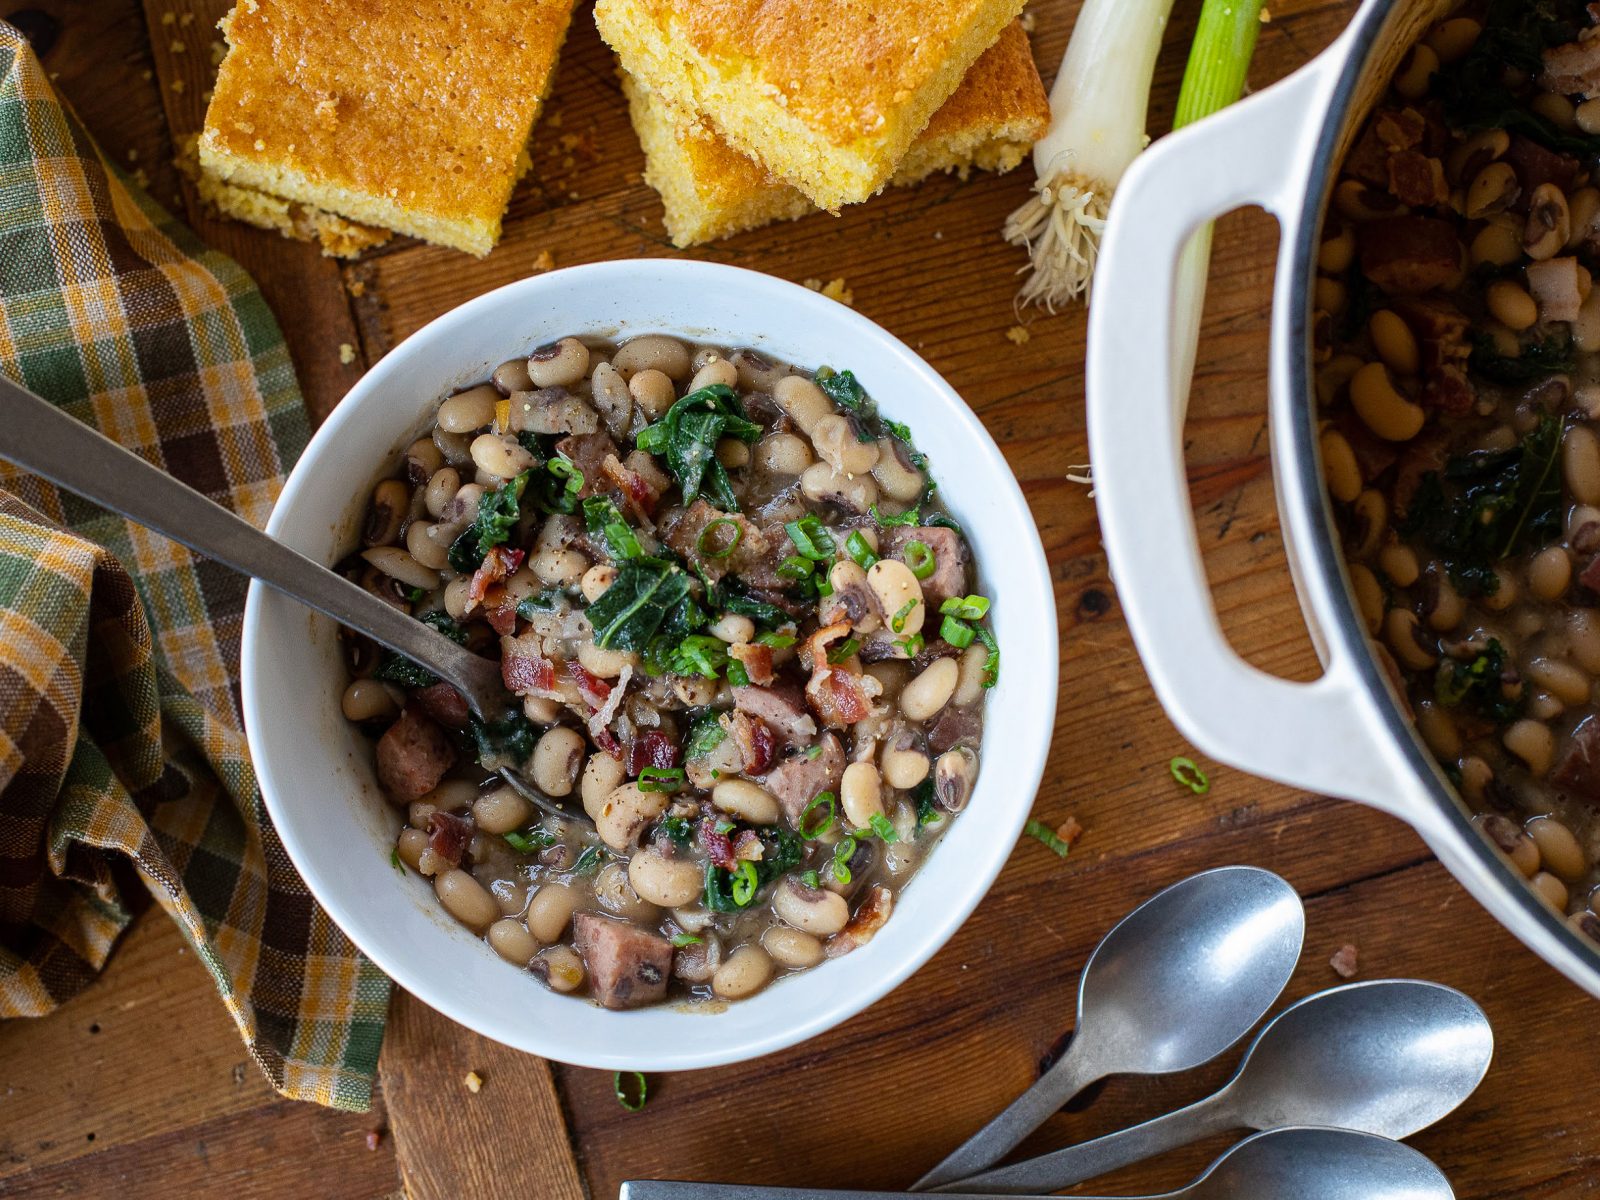 Pick Up Some Hatfield Bacon For Your New Year’s Meal – Black Eyed Peas With Bacon & Greens!